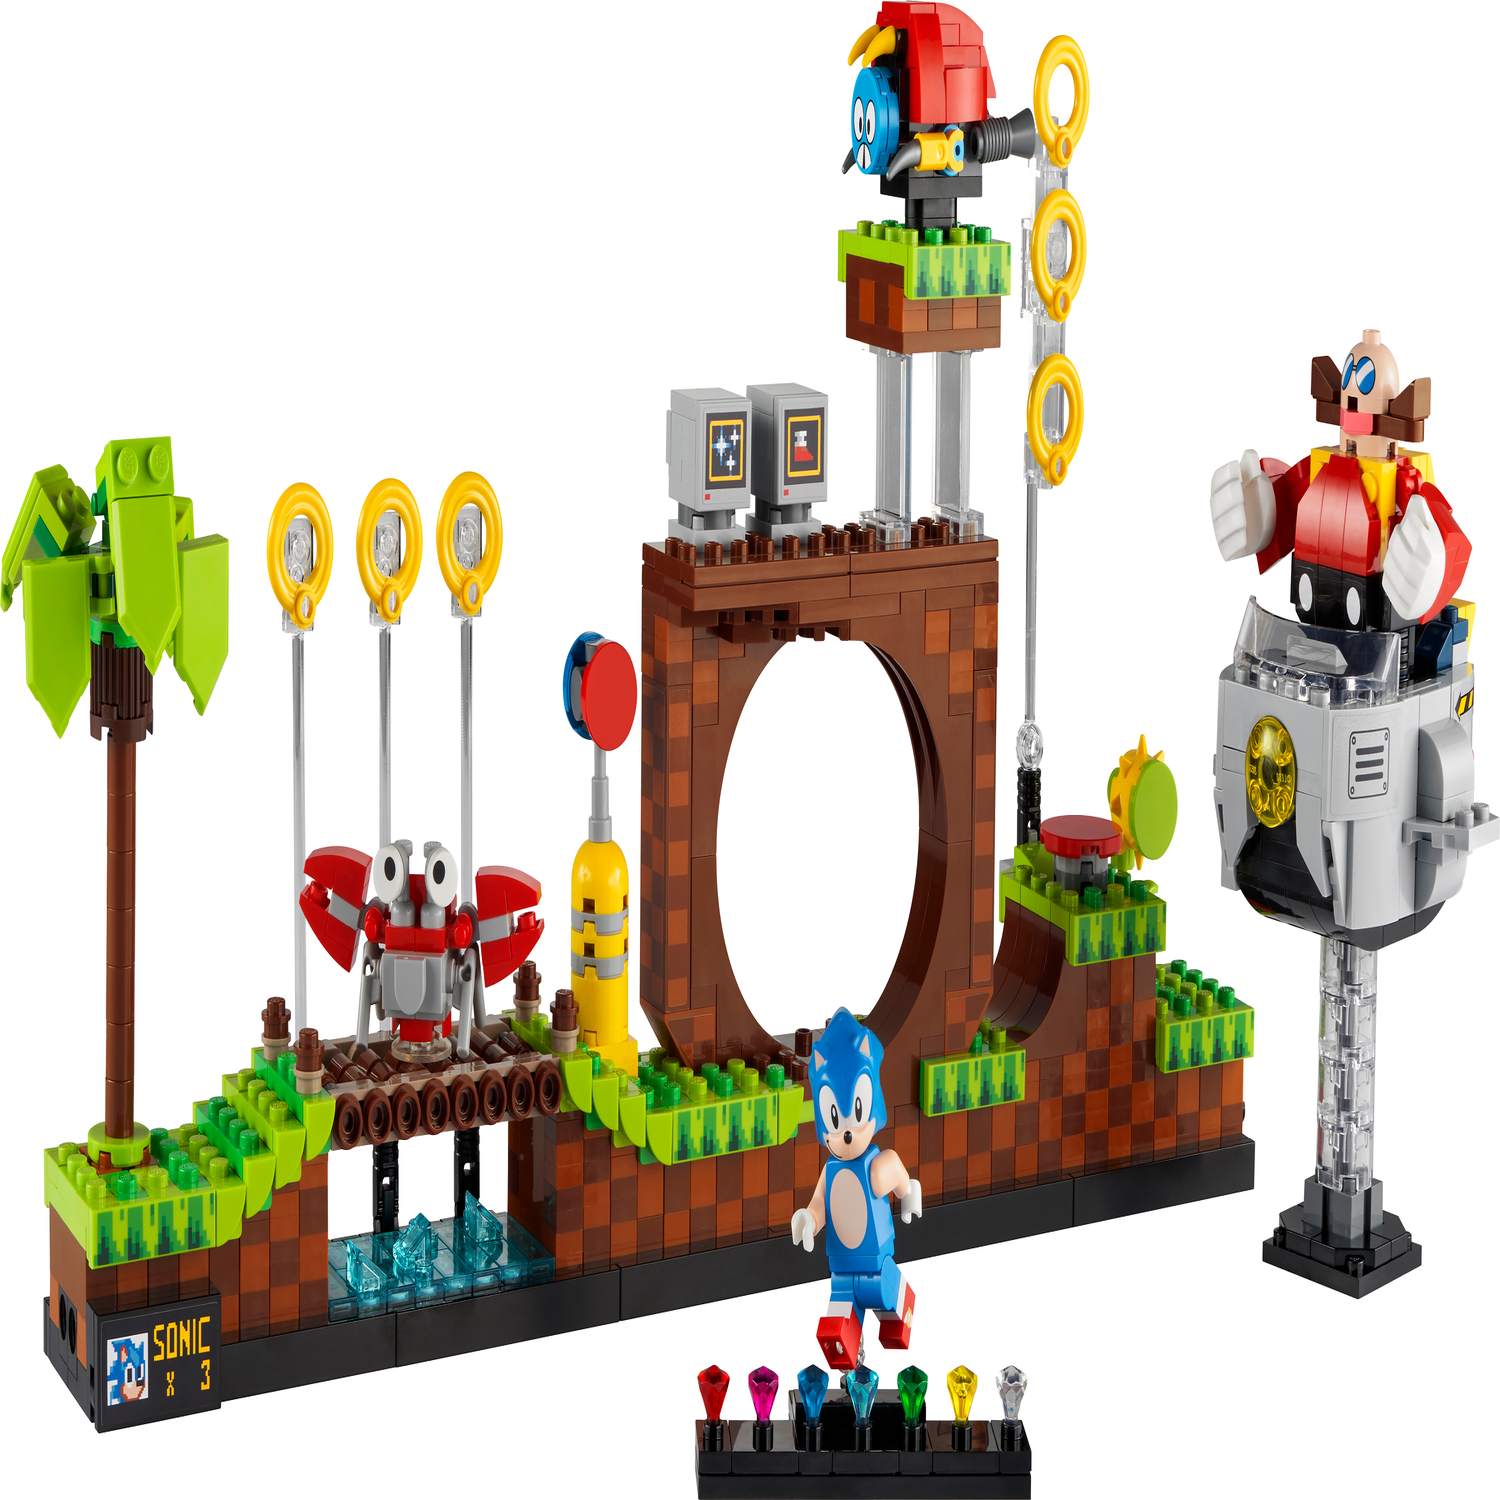 LEGO Ideas Sonic the Hedgehog 21331 - Green Hill Zone Set For Adults